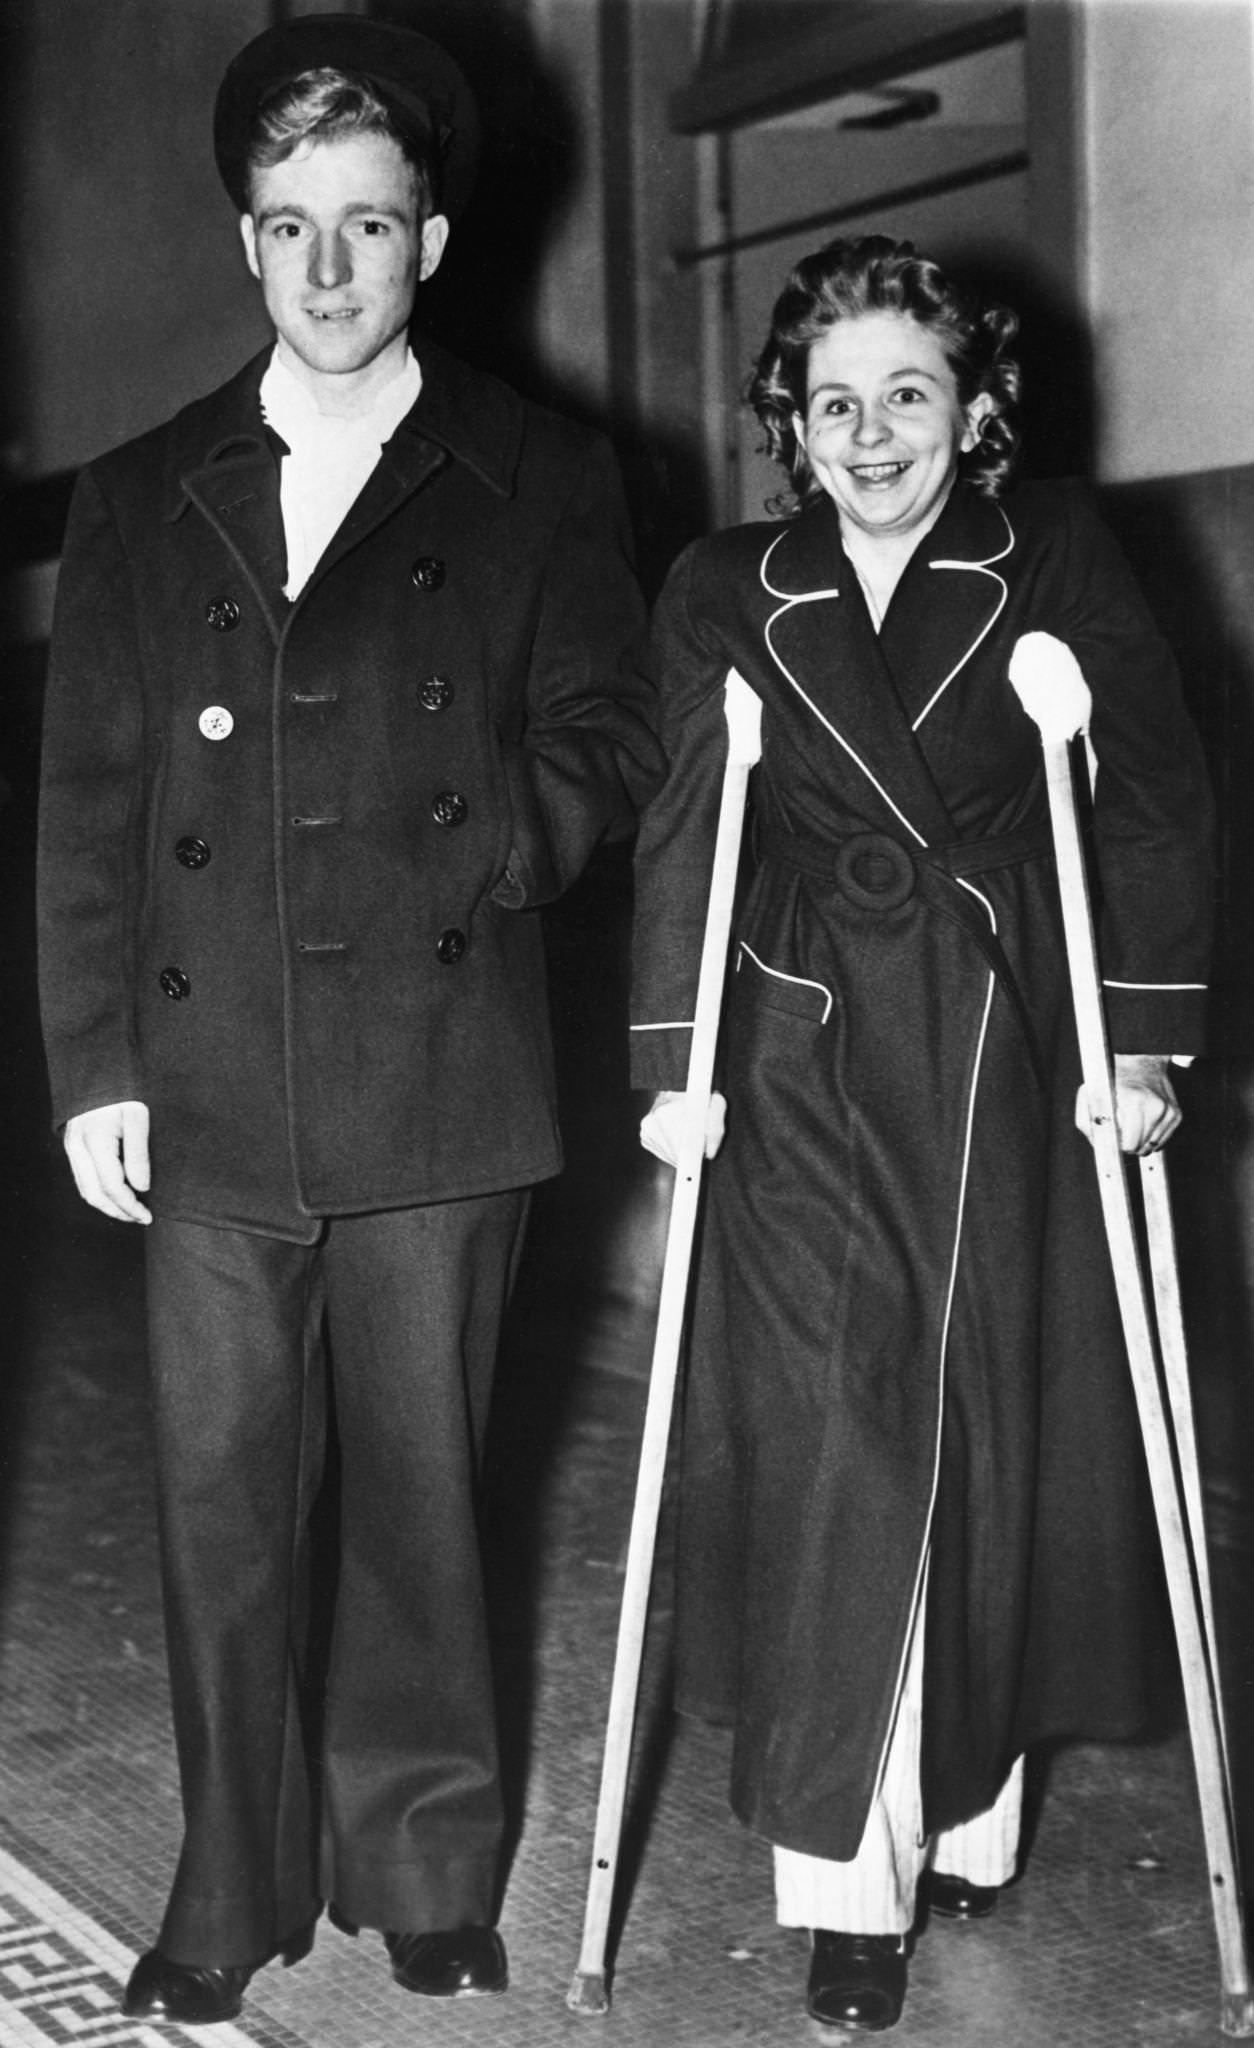 Betty Lou Oliver Fell 80 Floors and Walked Again